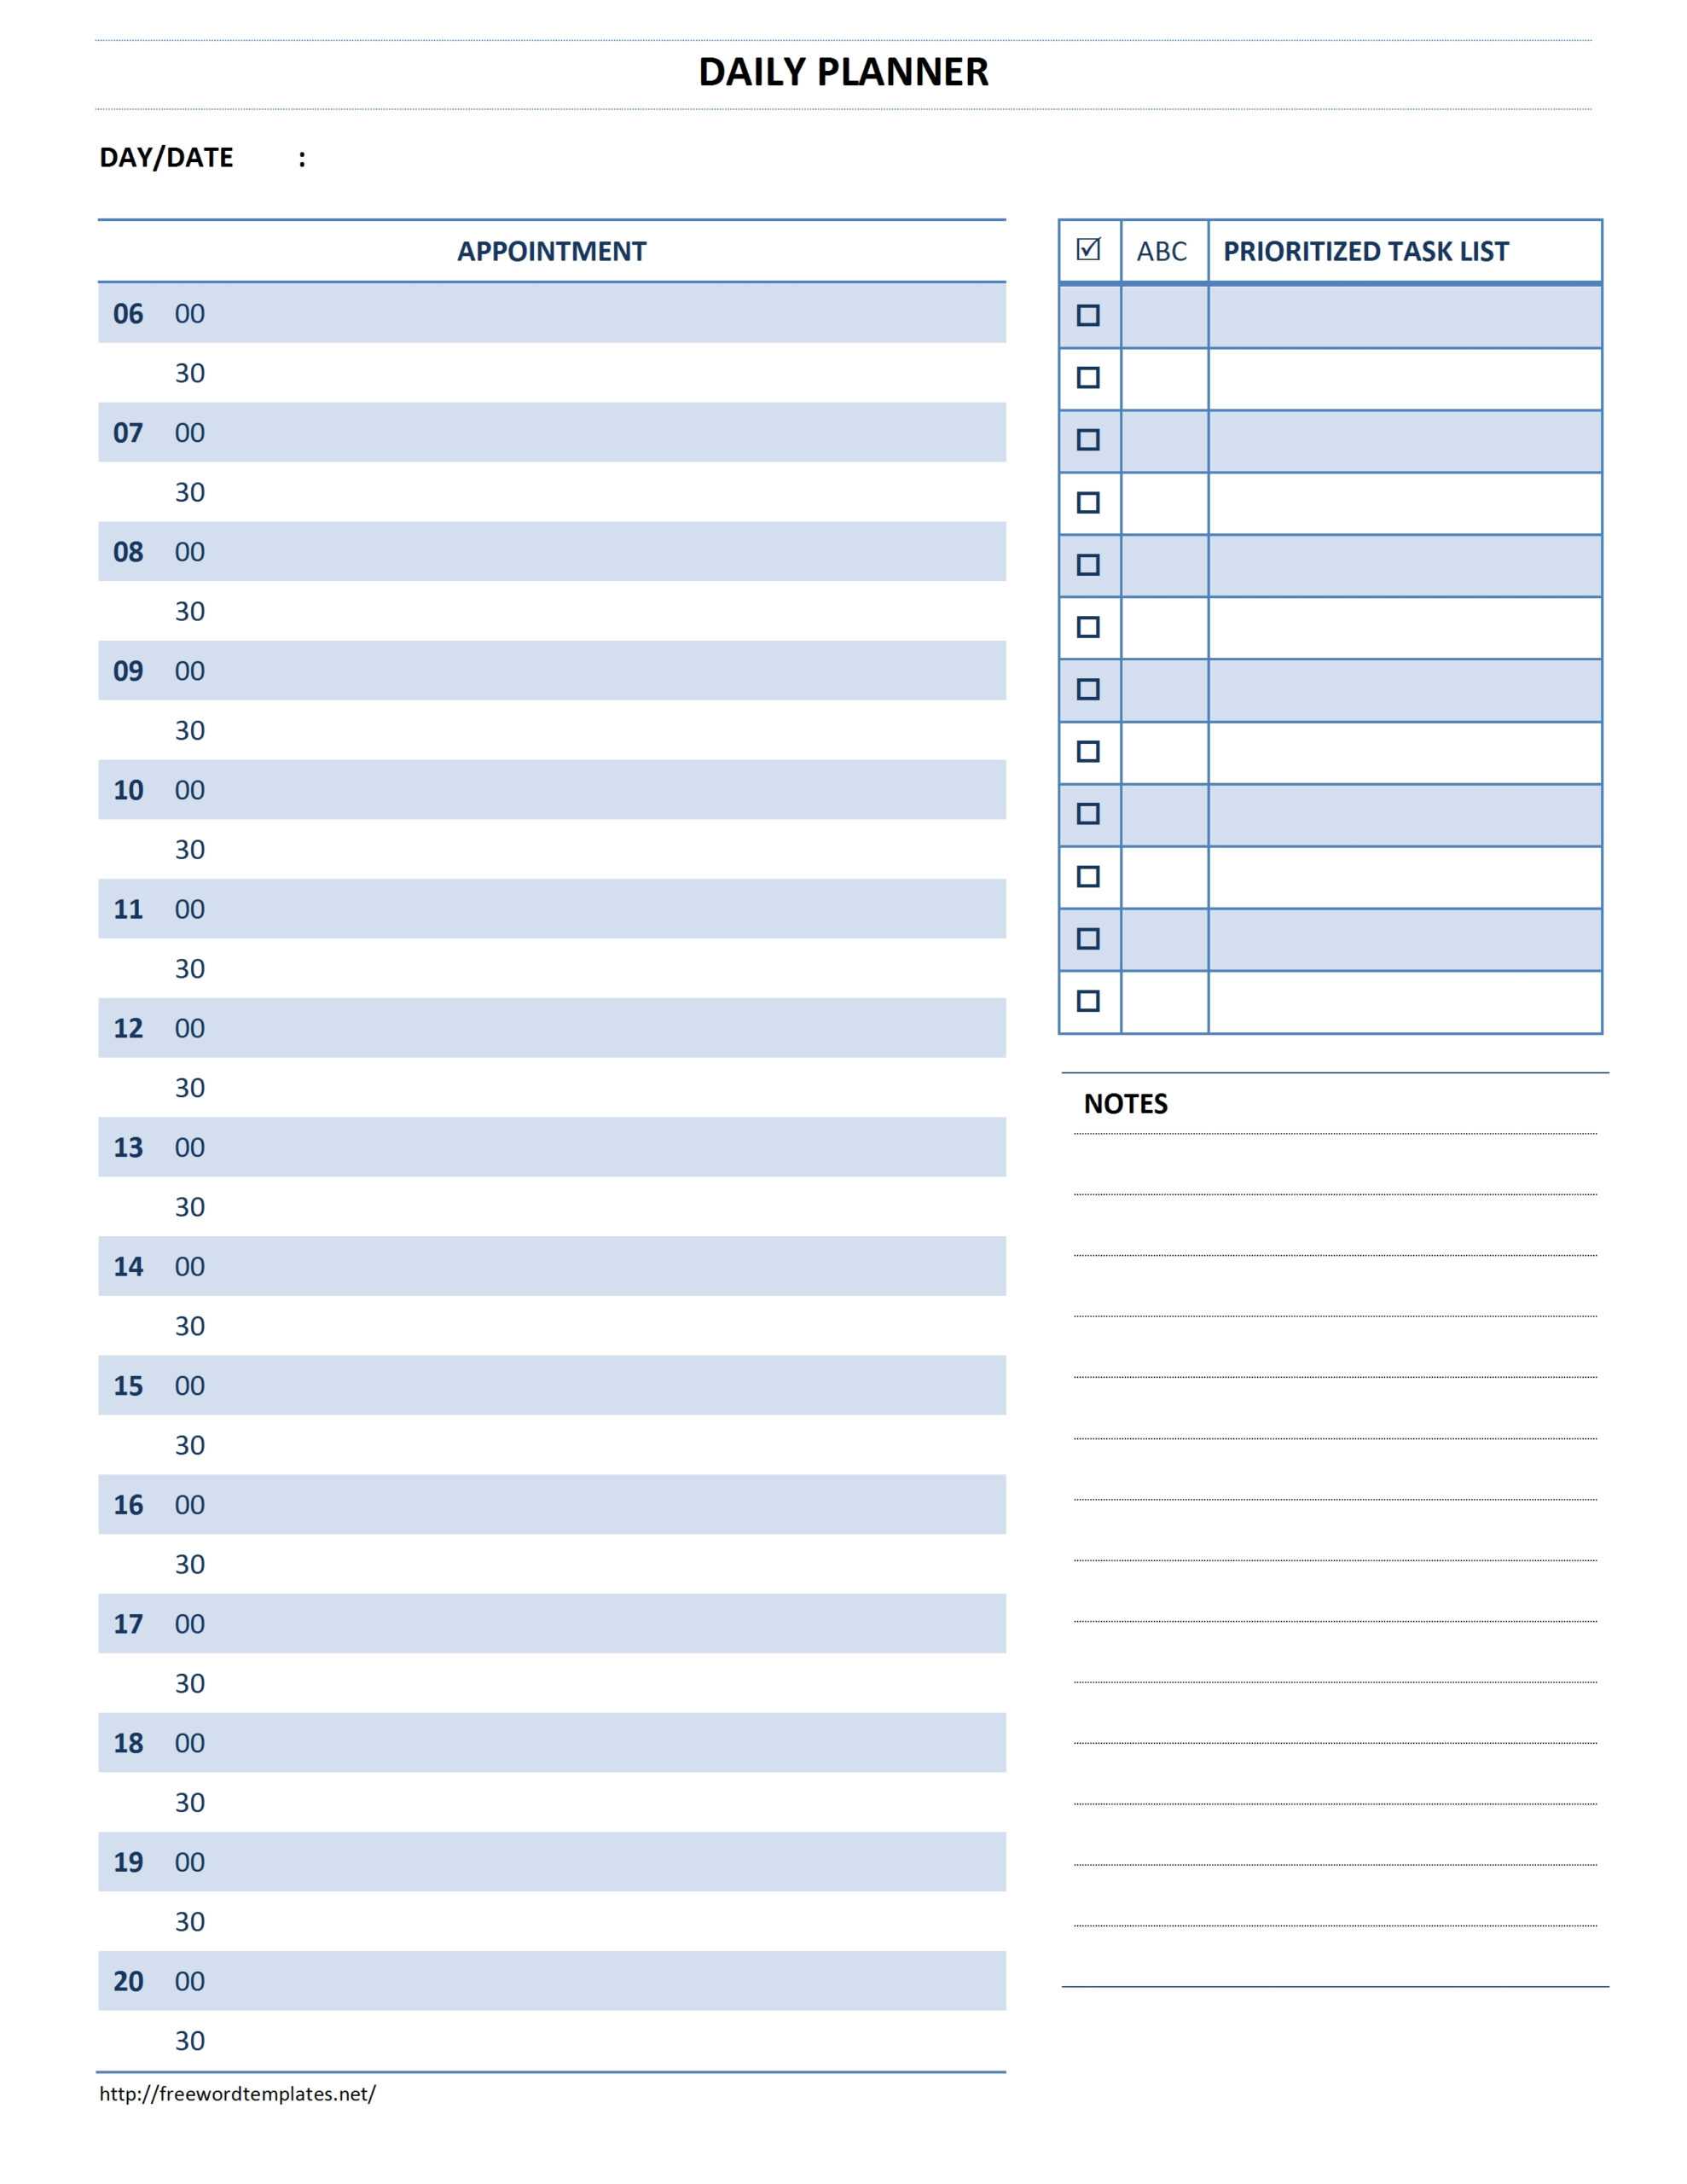 Daily Planner Template Regarding Appointment Card Template Word